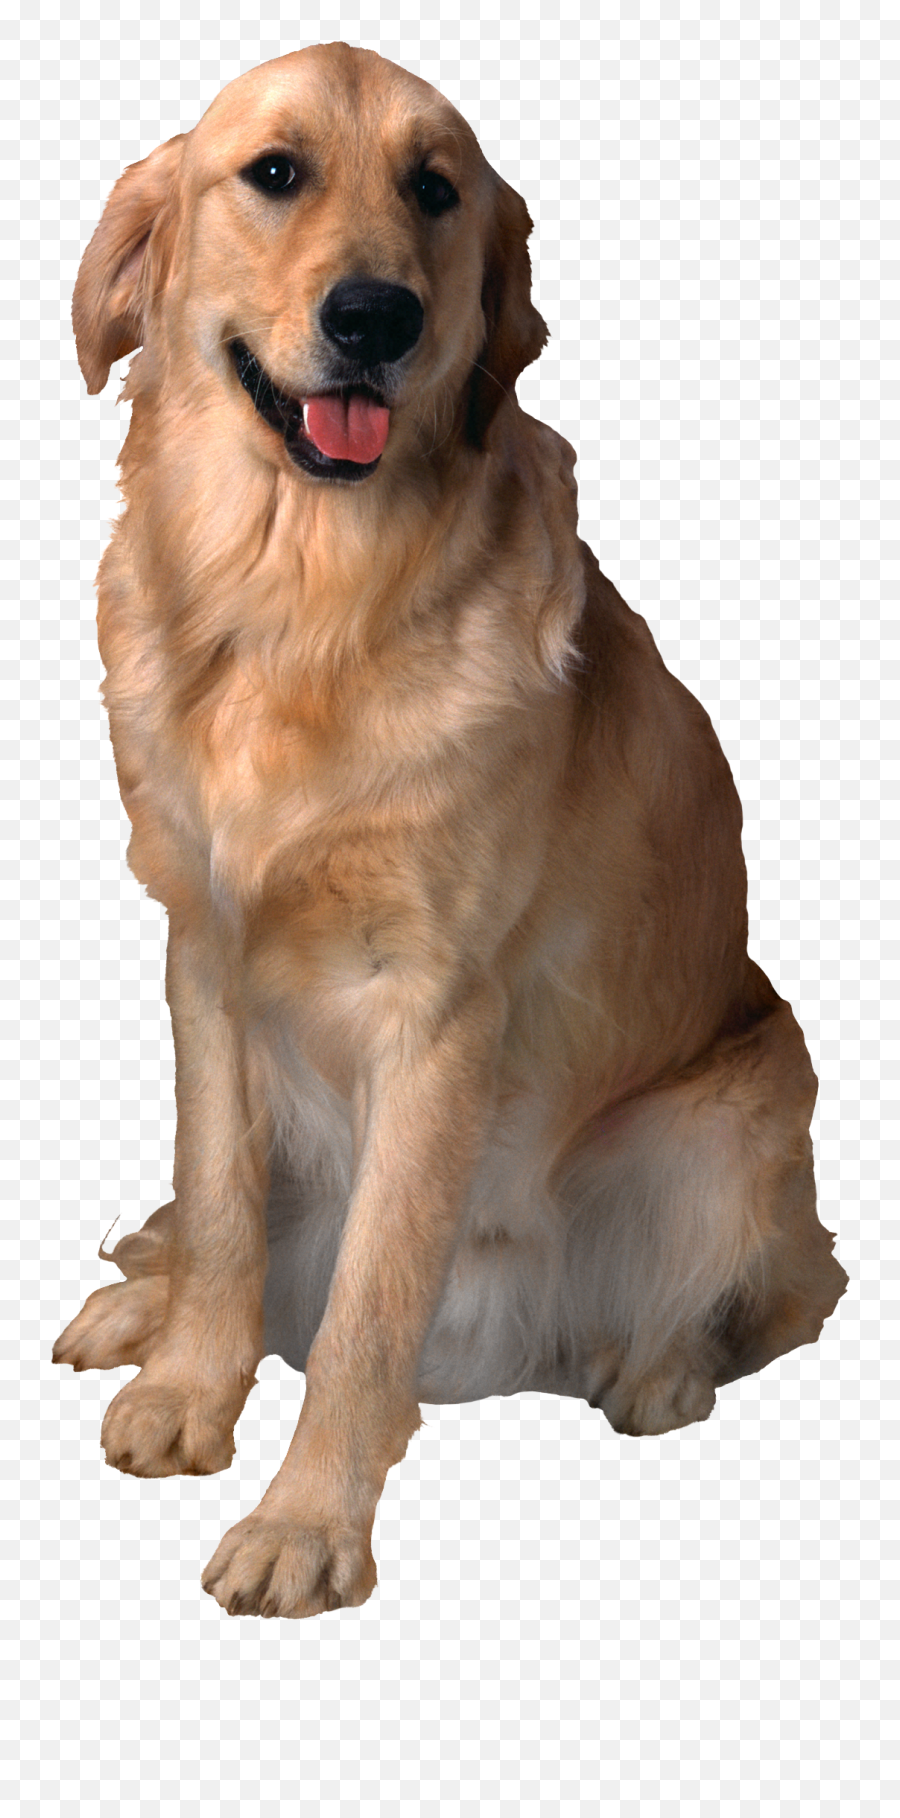 Dog Png Alpha Channel Clipart Images Pictures With - Dog Photo Alpha Channel,Dog With Transparent Background